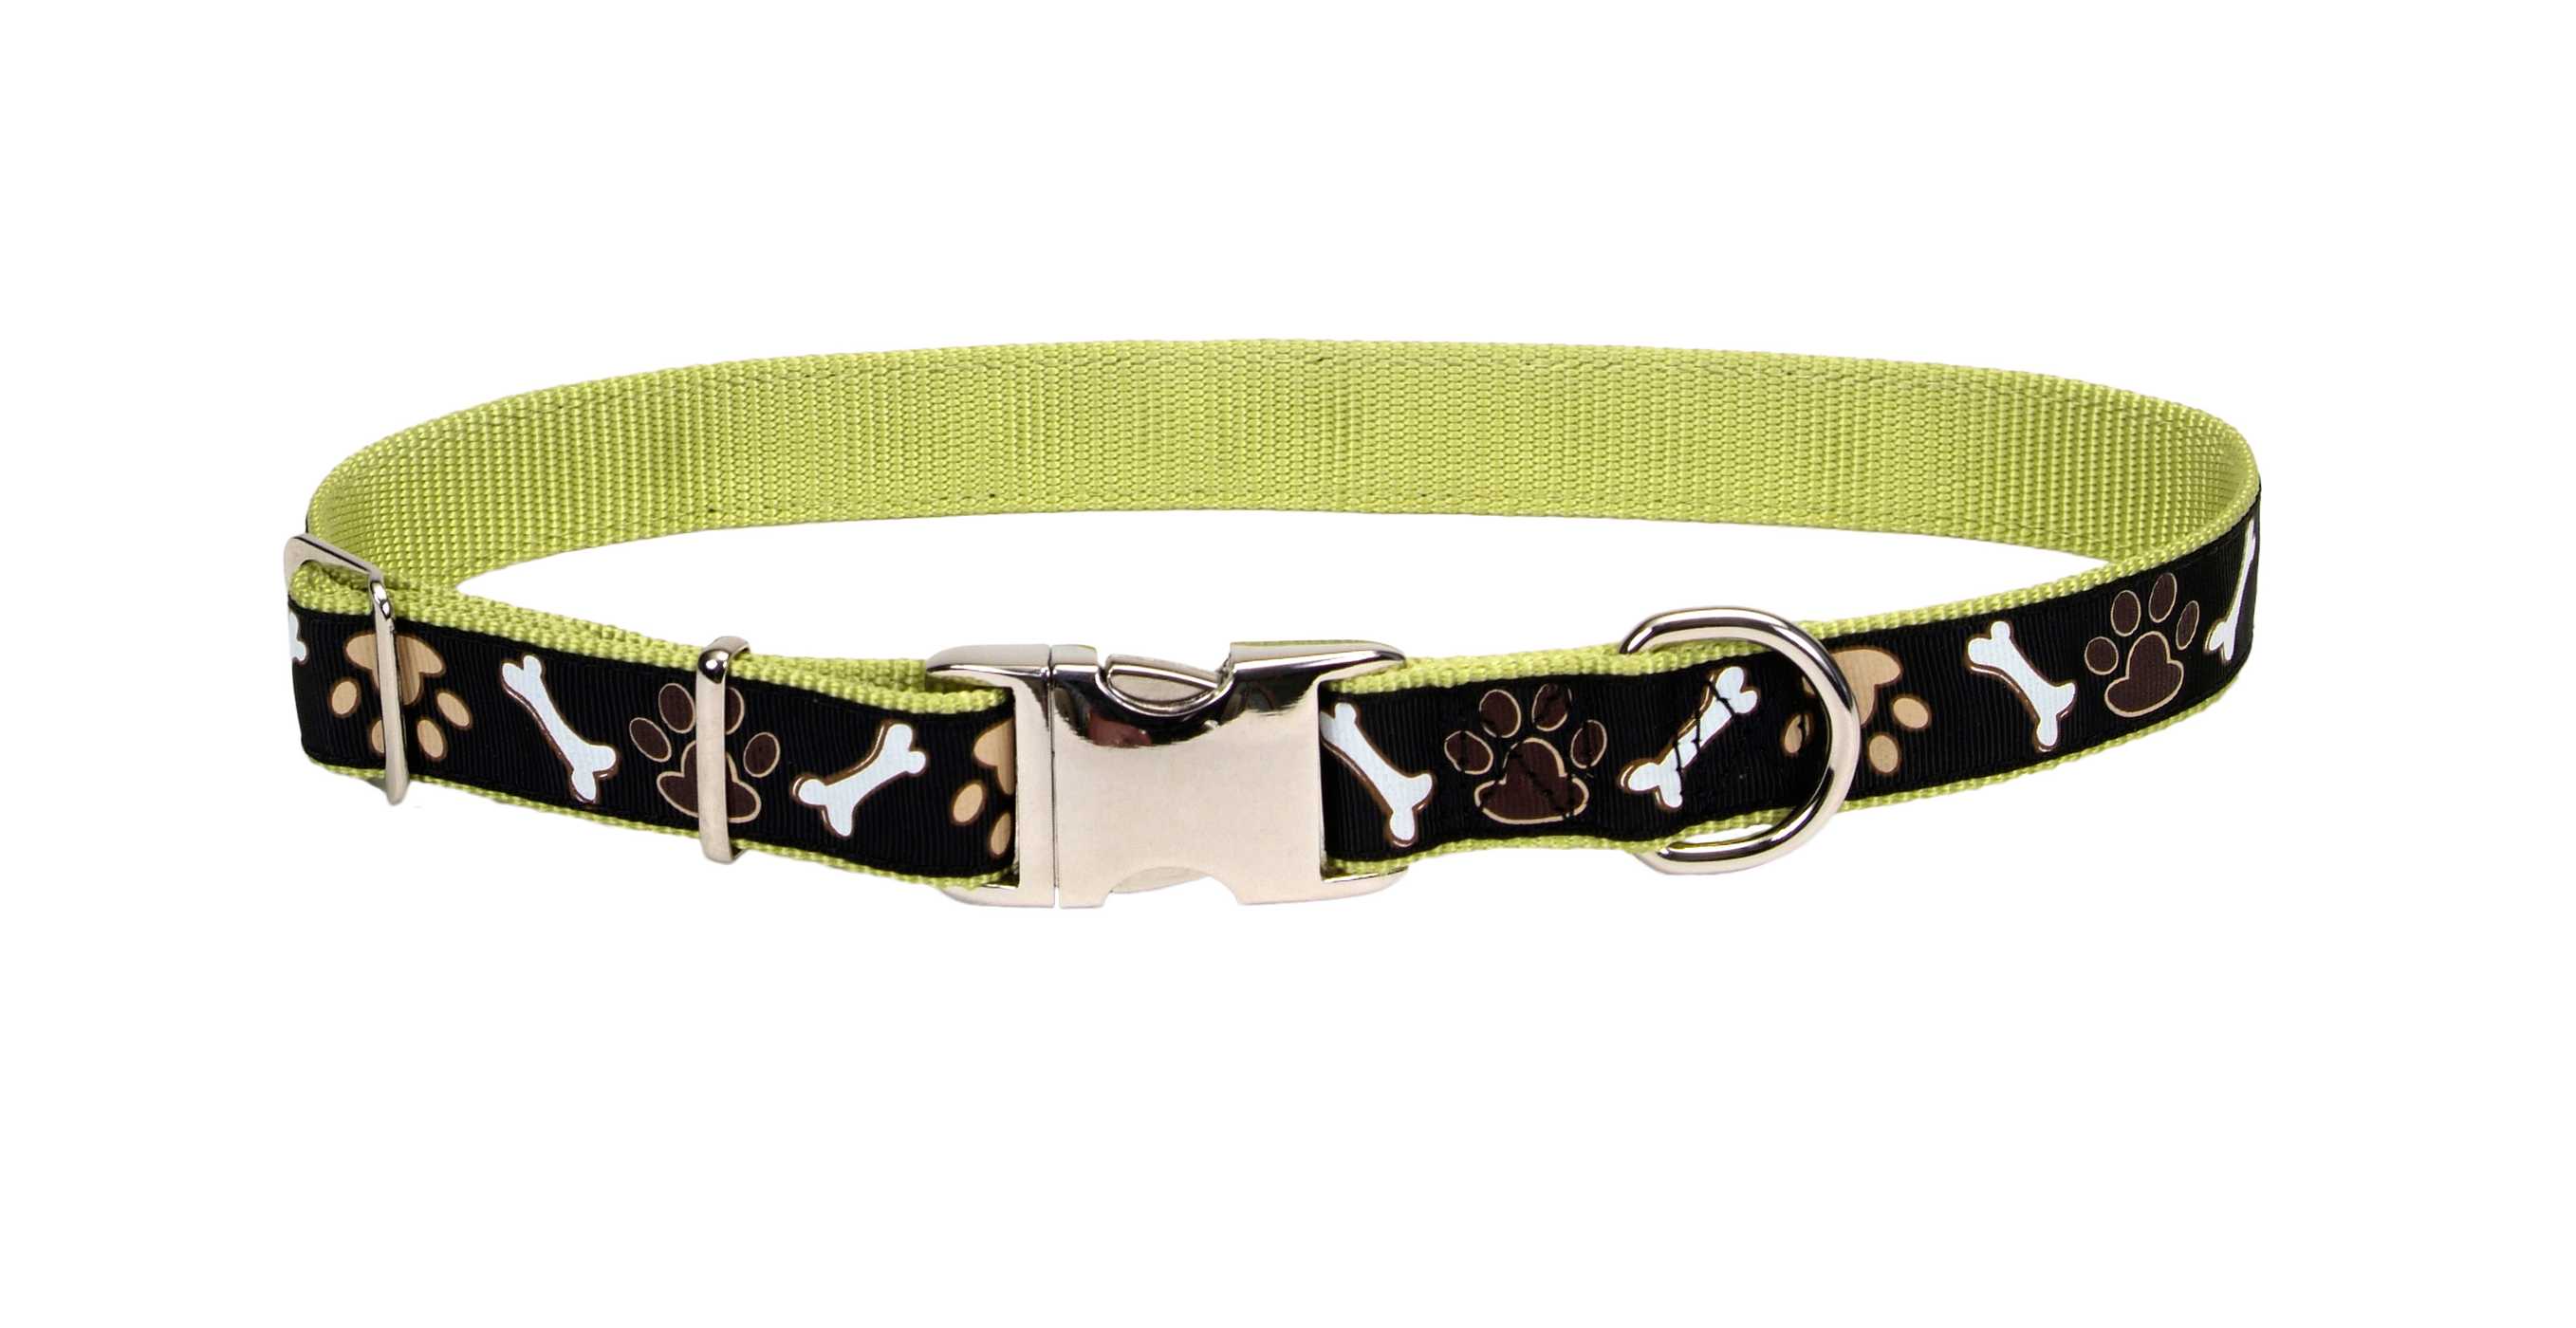 Coastal Pet Products 5/8 Inch Adjustable Nylon Collar with Brown Paws and Bones Ribbon; image 2 of 2